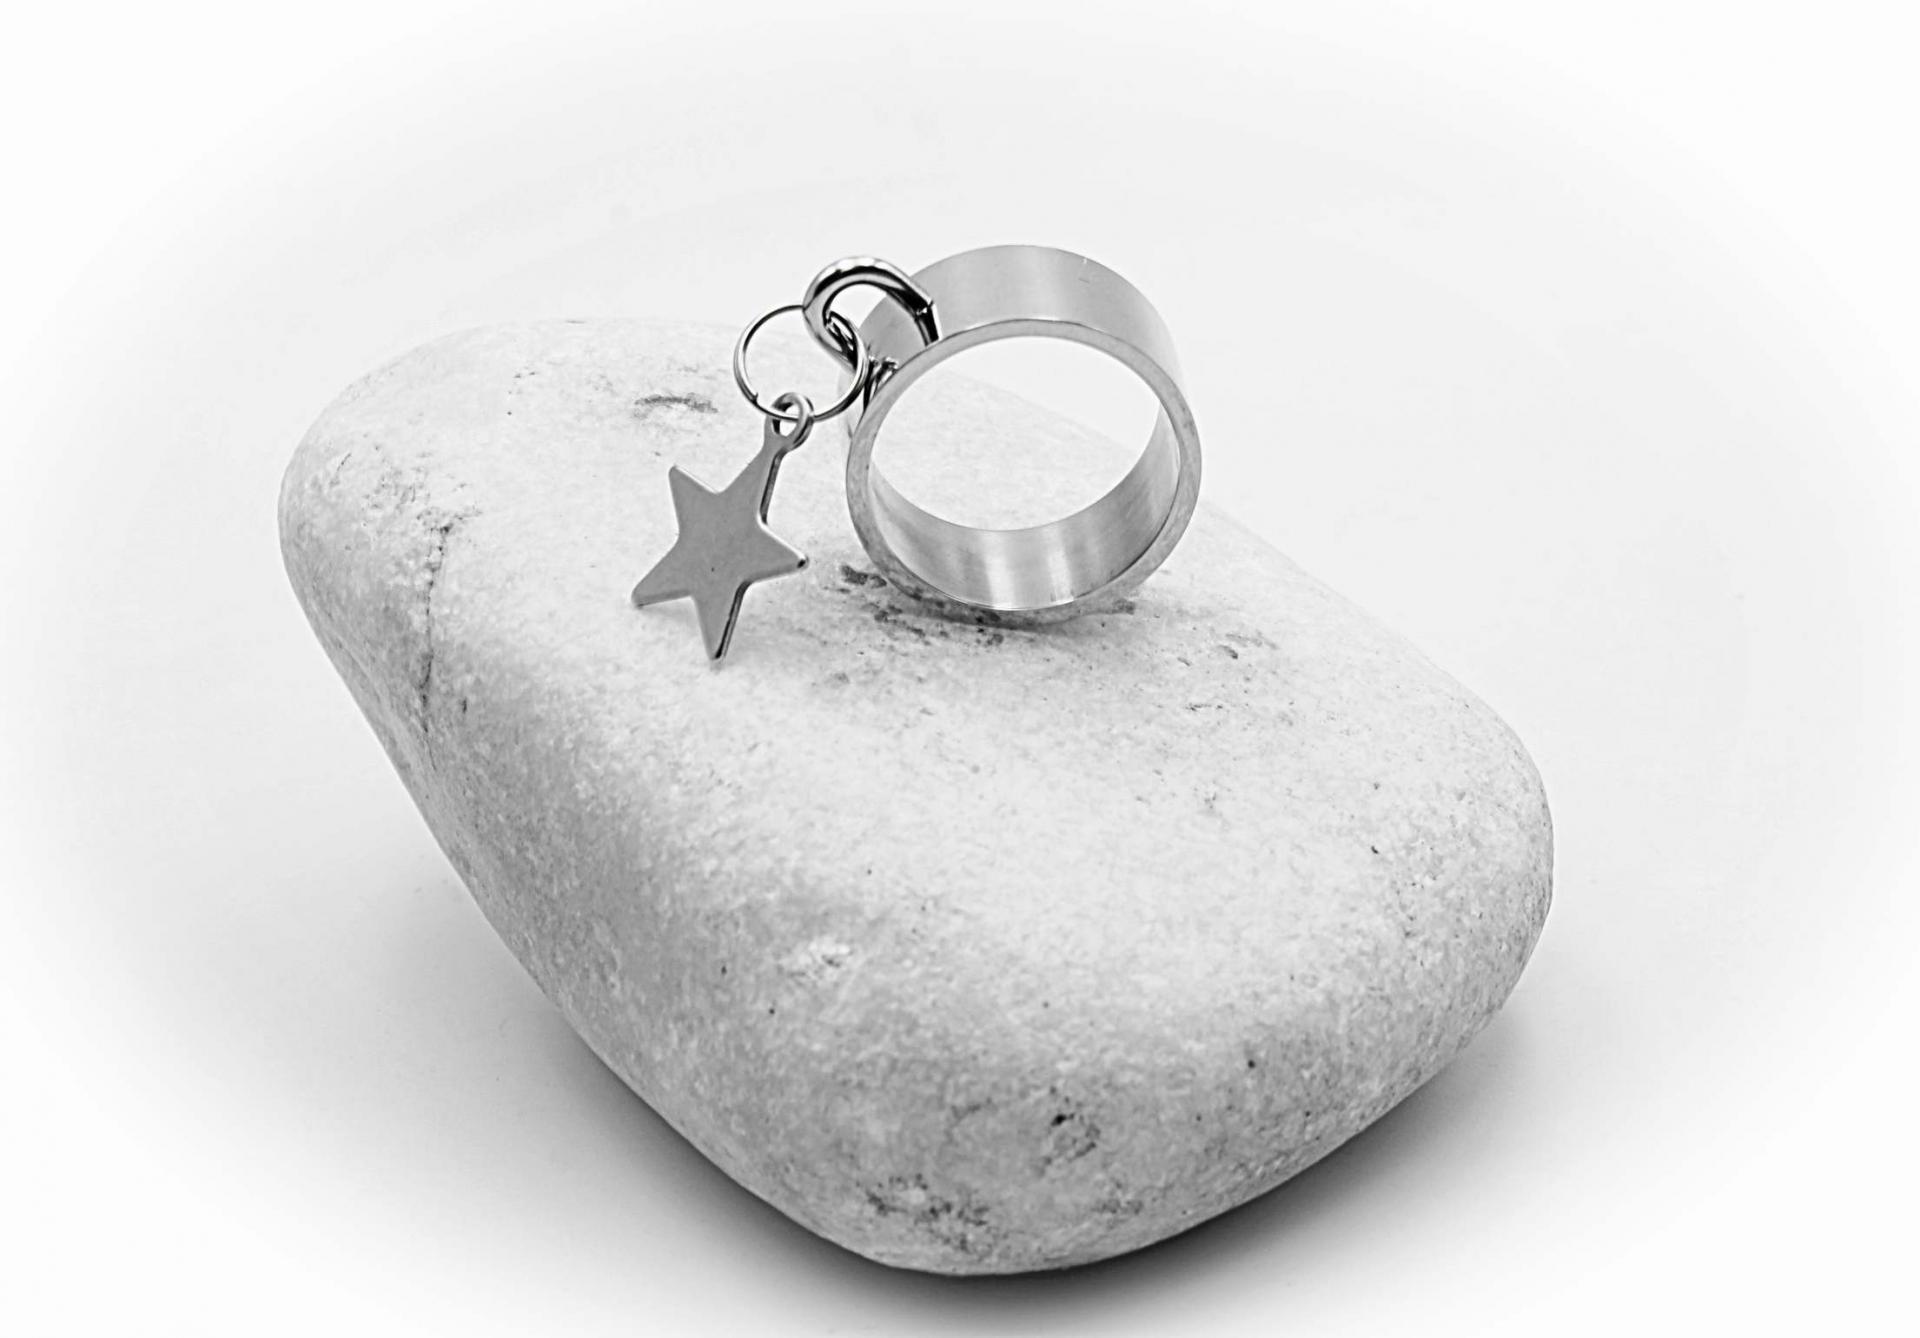 Stainless Steel Ring With Star Dangle Charm